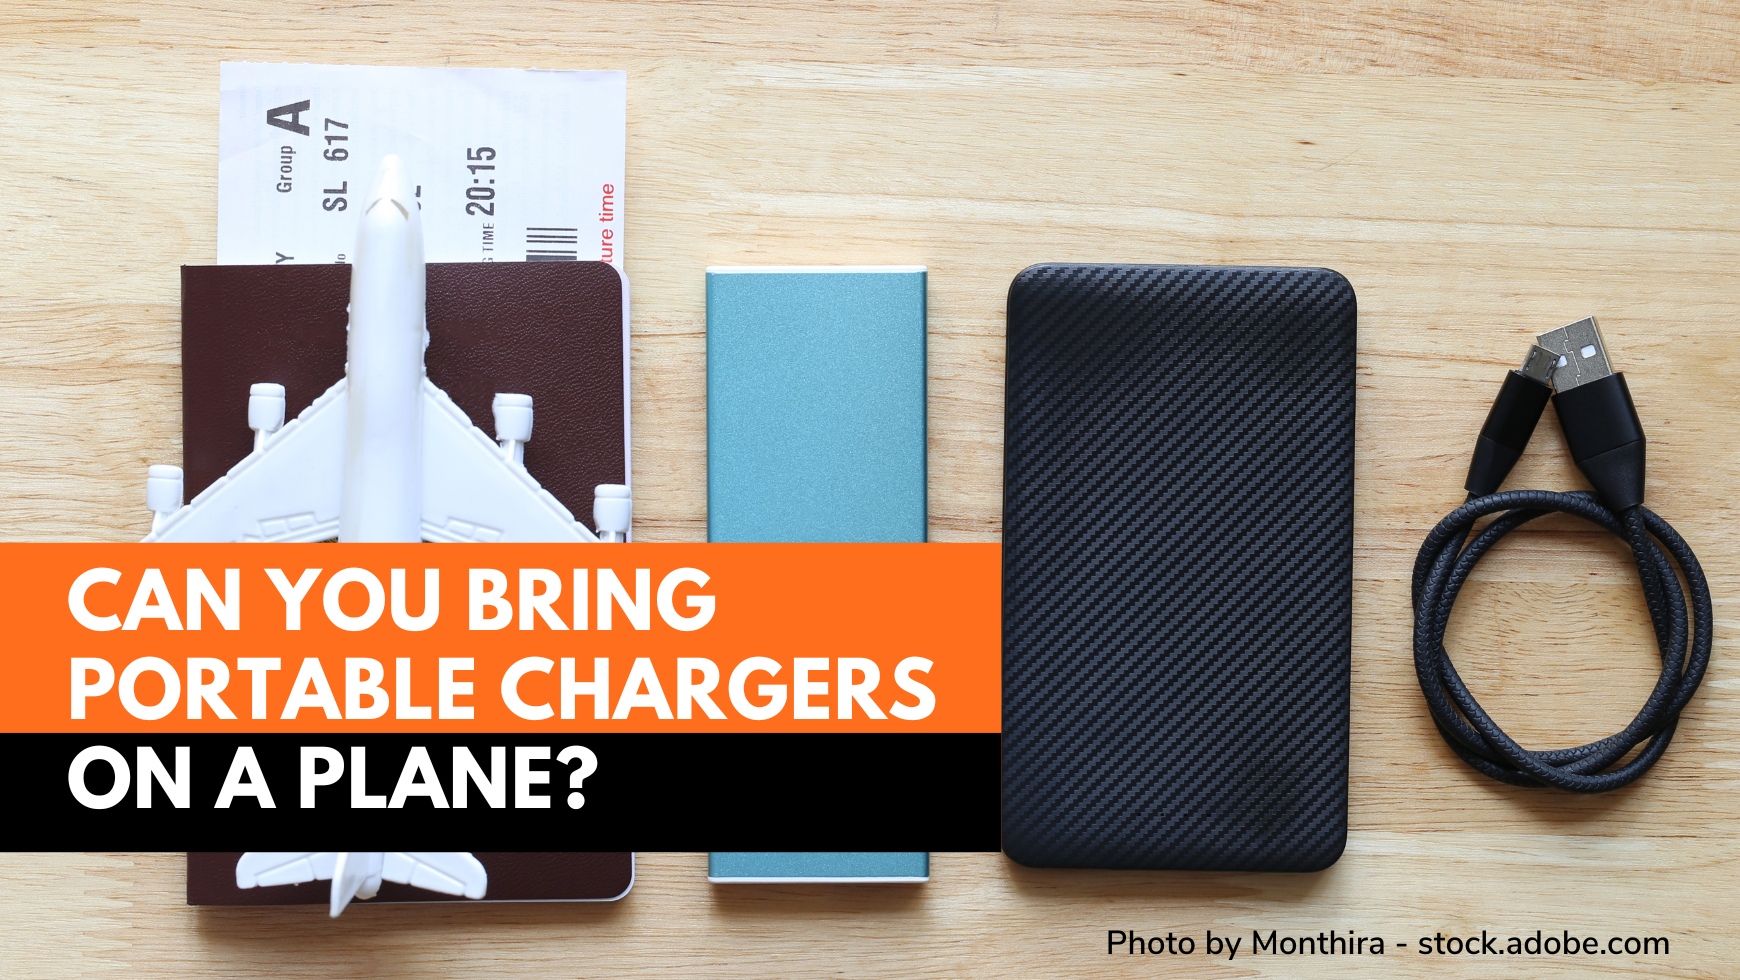 What Is a Portable Charger?